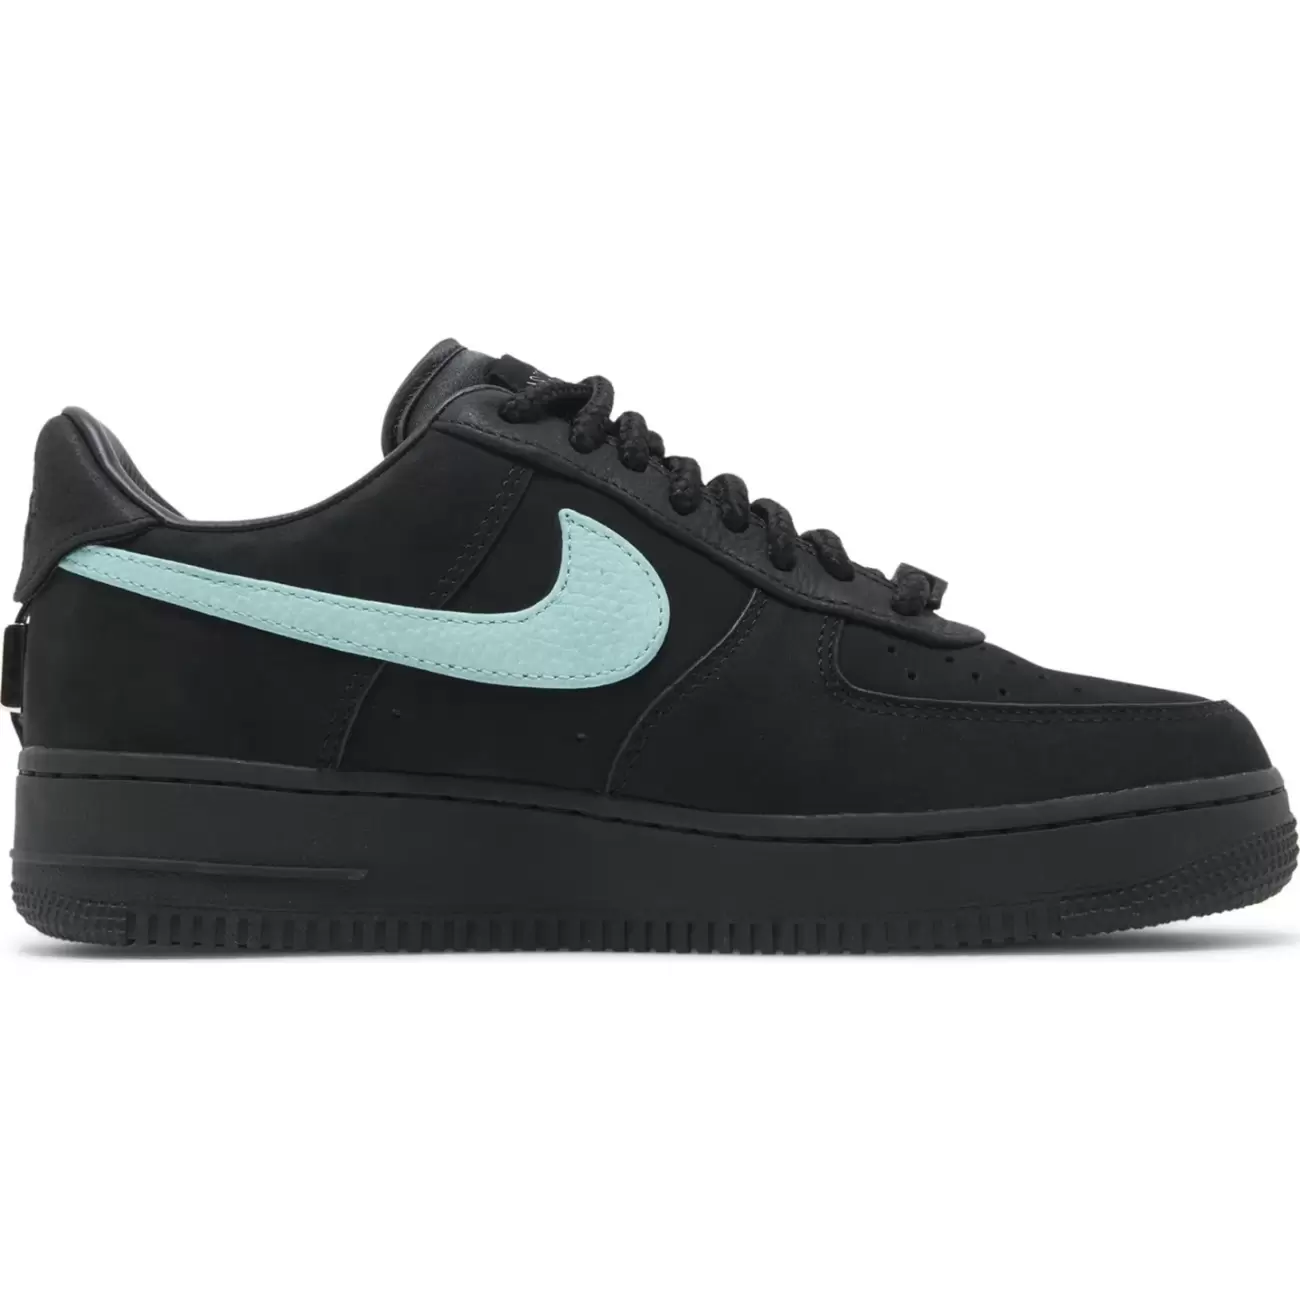 Nike x Tiffany & Co. Air Force 1 Low SP 1837